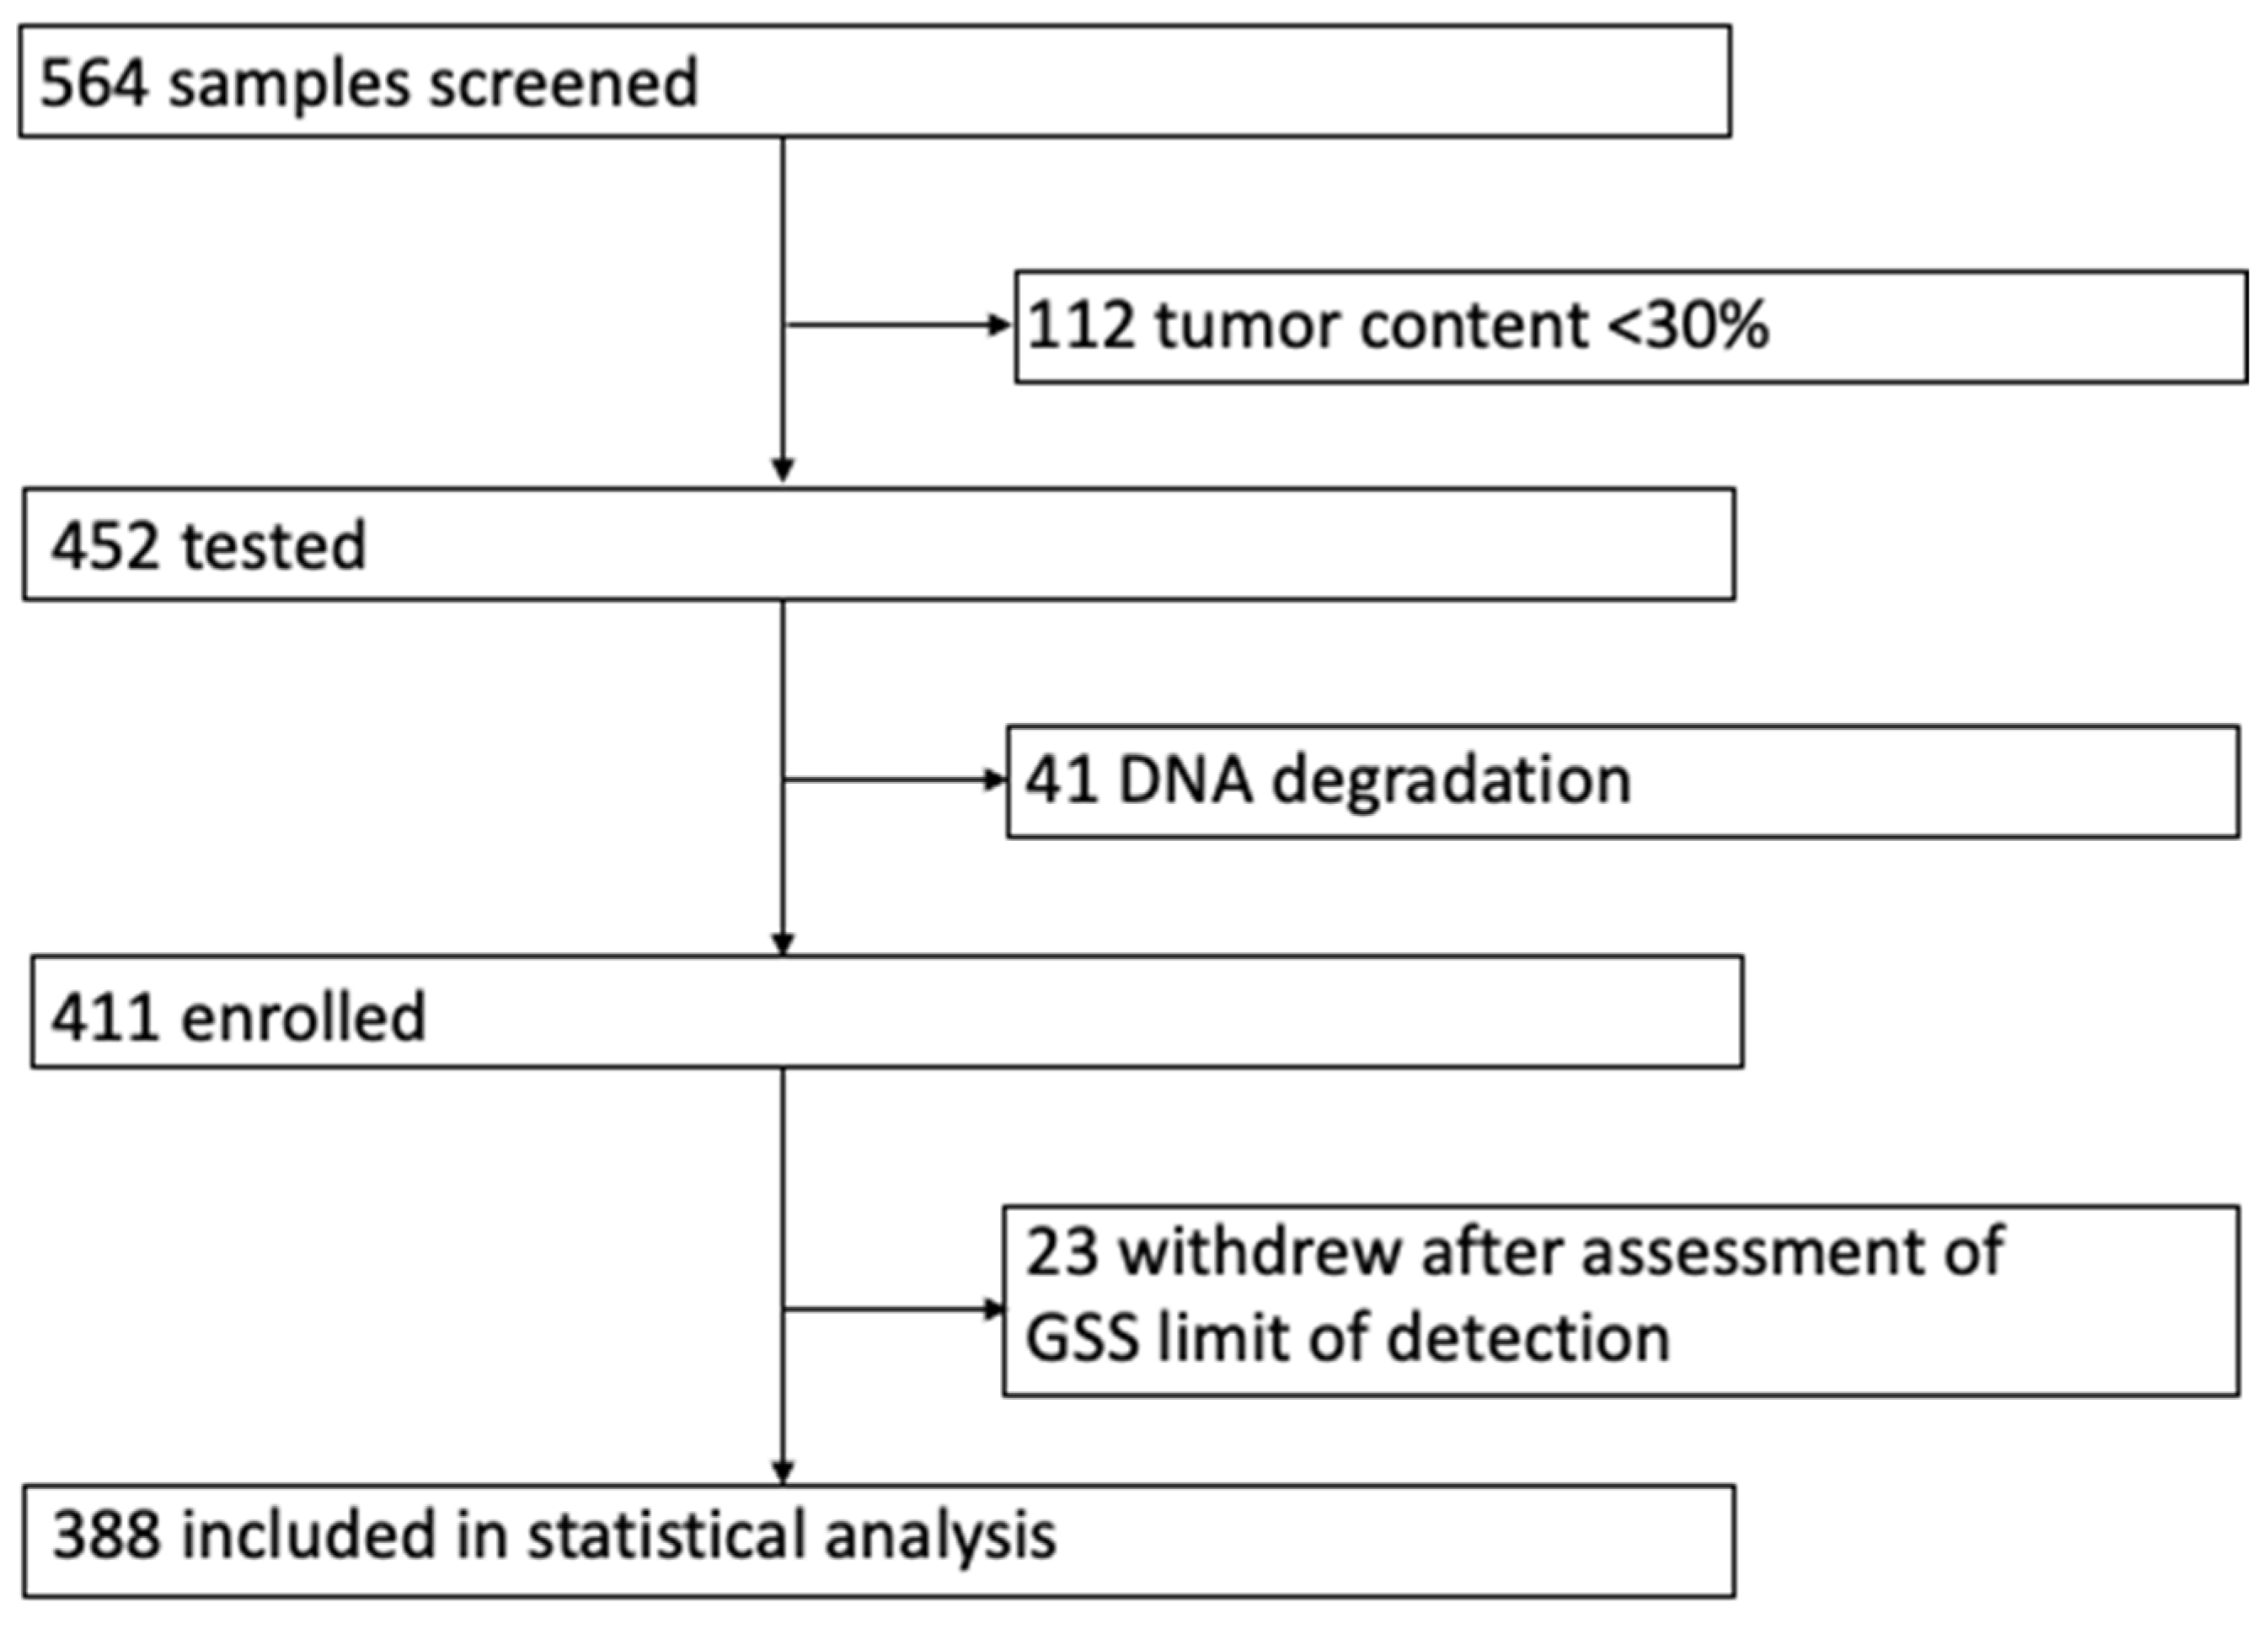 IJMS | Free Full-Text | HRD Testing of Ovarian Cancer in Routine